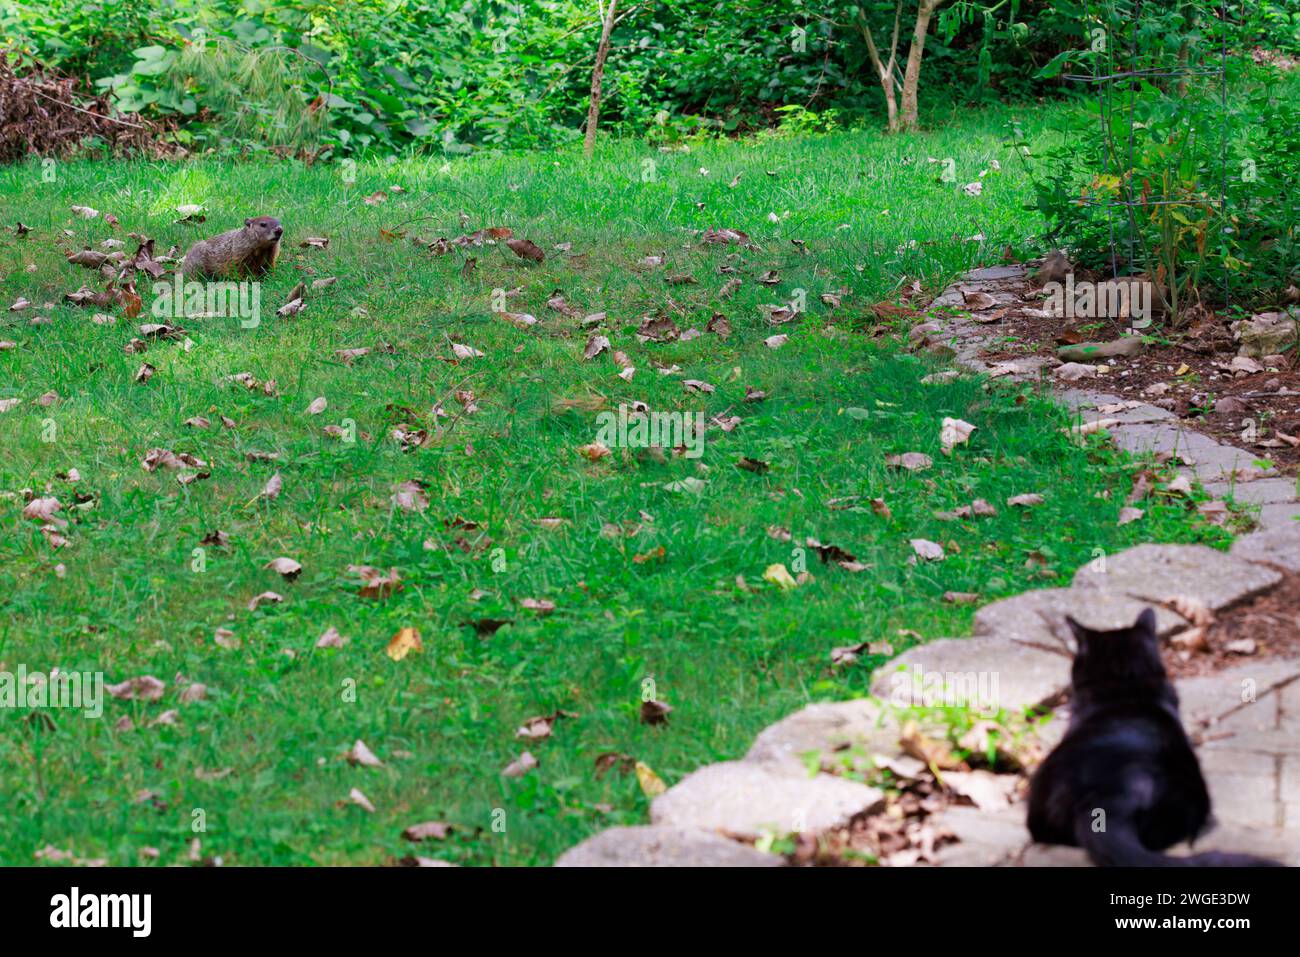 A groundhog in the green grass of a yard or field with a black cat watching it in the foreground Stock Photo